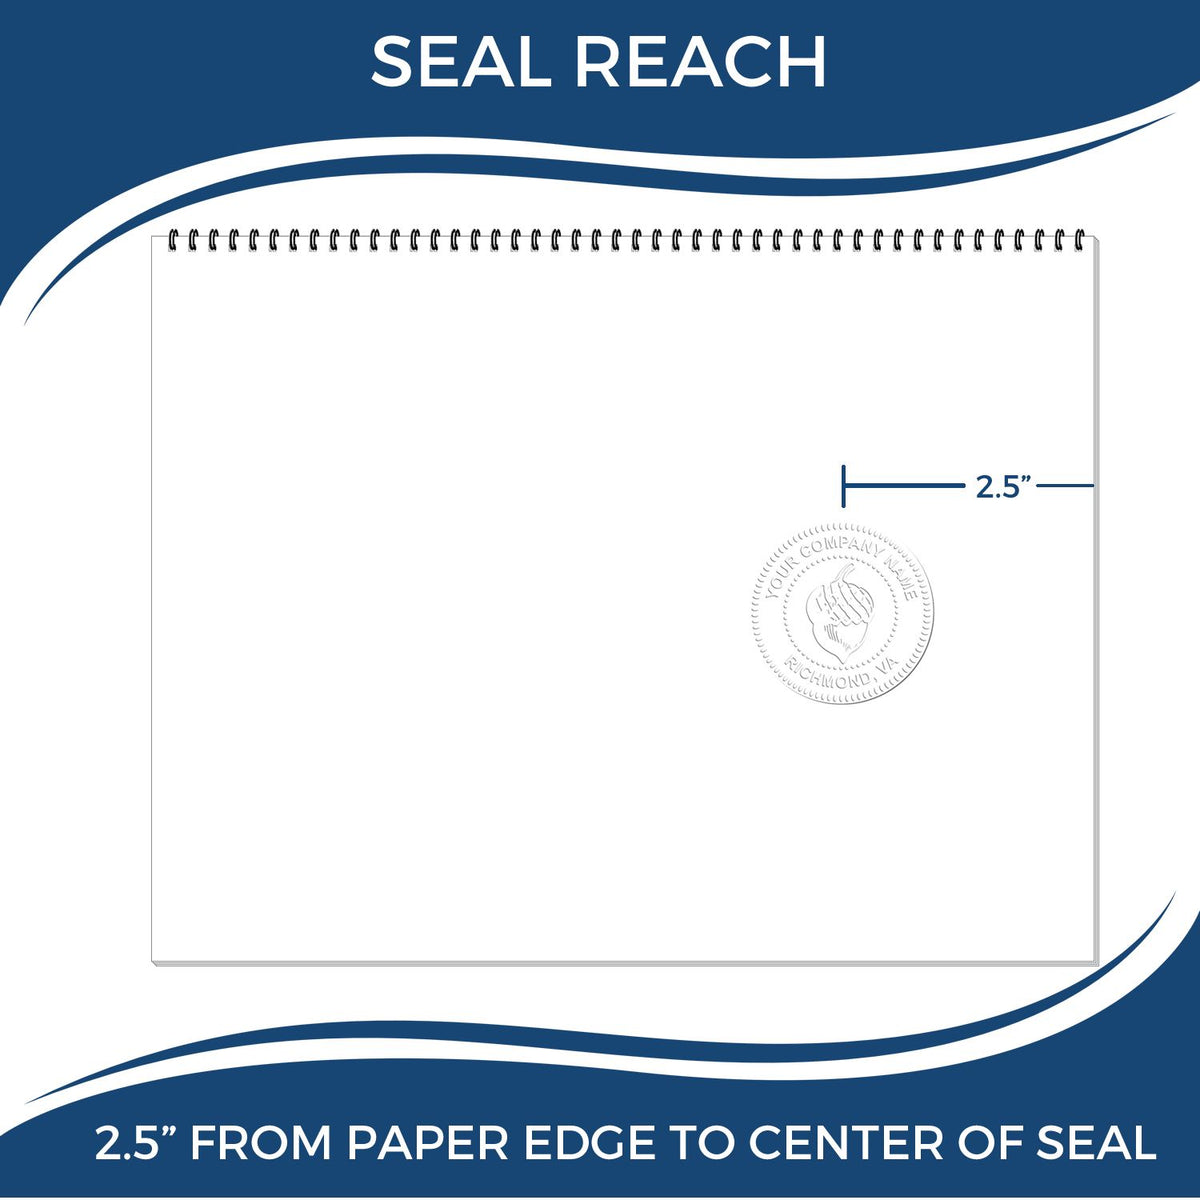 An infographic showing the seal reach which is represented by a ruler and a miniature seal image of the Heavy Duty Cast Iron District of Columbia Architect Embosser